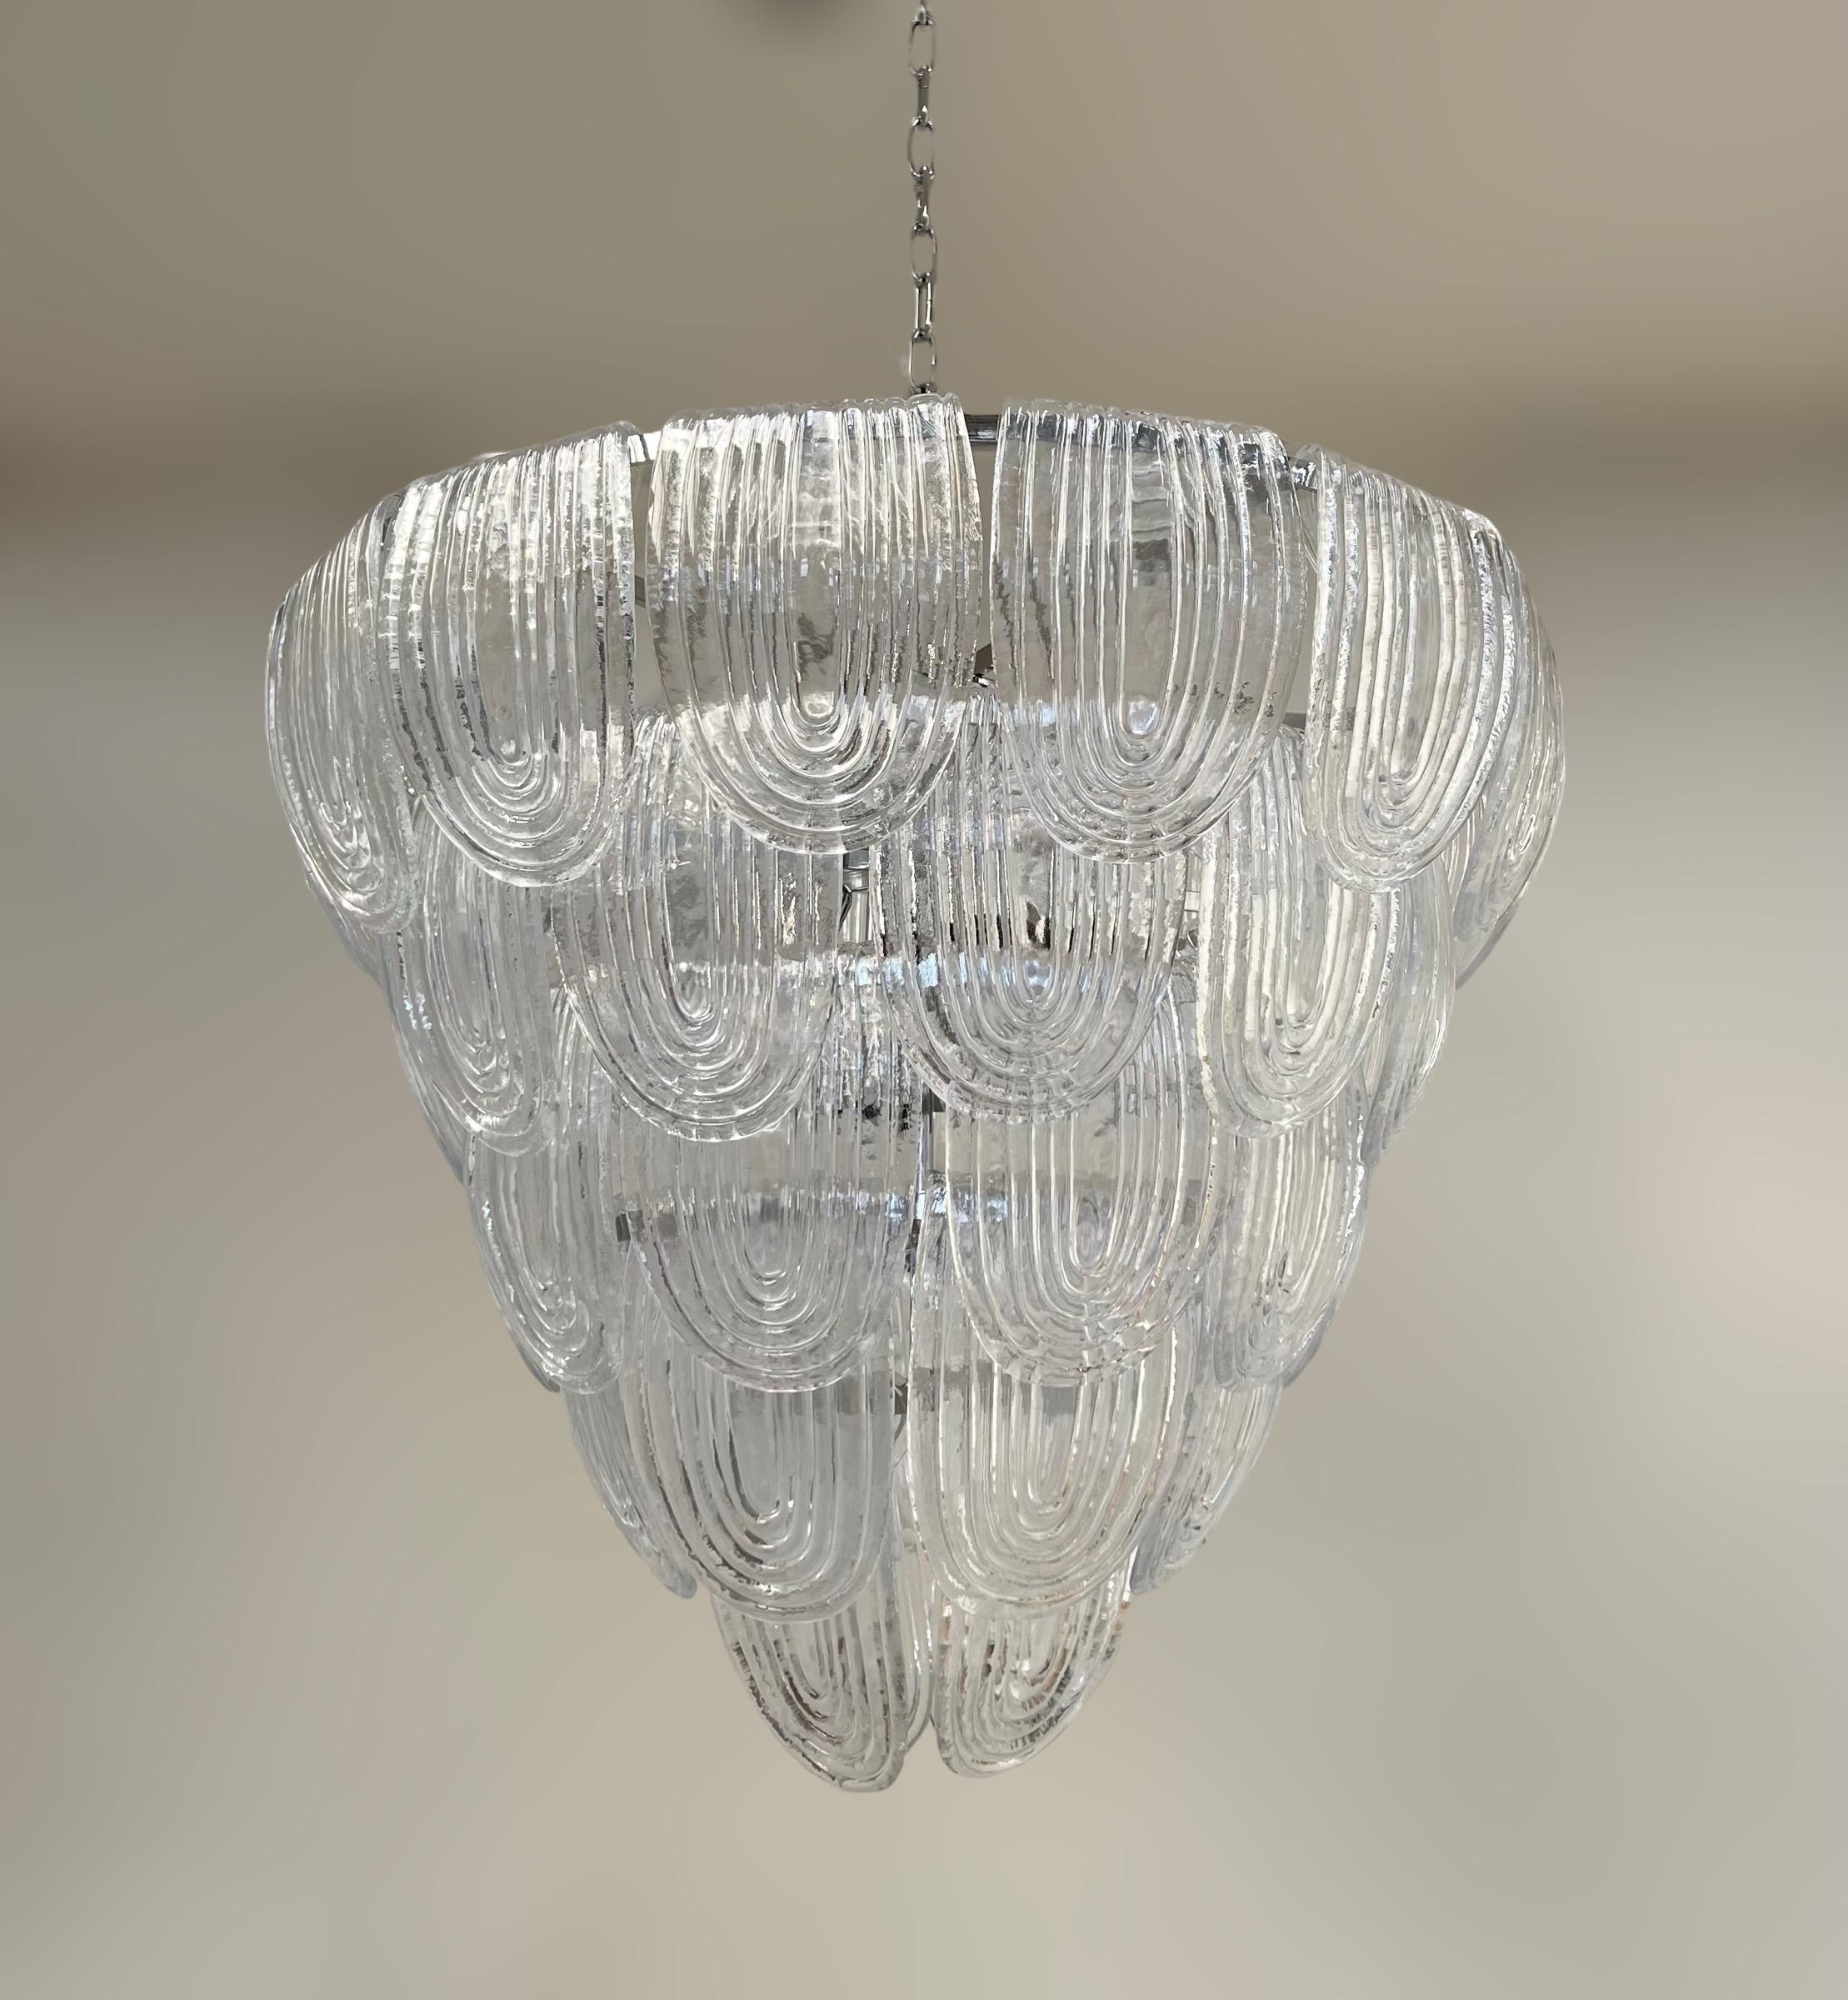 Italian chandelier with vintage 1960s clear ribbed curved Murano glasses, mounted on newly made chrome finish metal frame / Made in Italy
12 ights / E26 or E27 type / max 60W each
Measures: diameter 31.5 inches, height 28 inches, total height 56